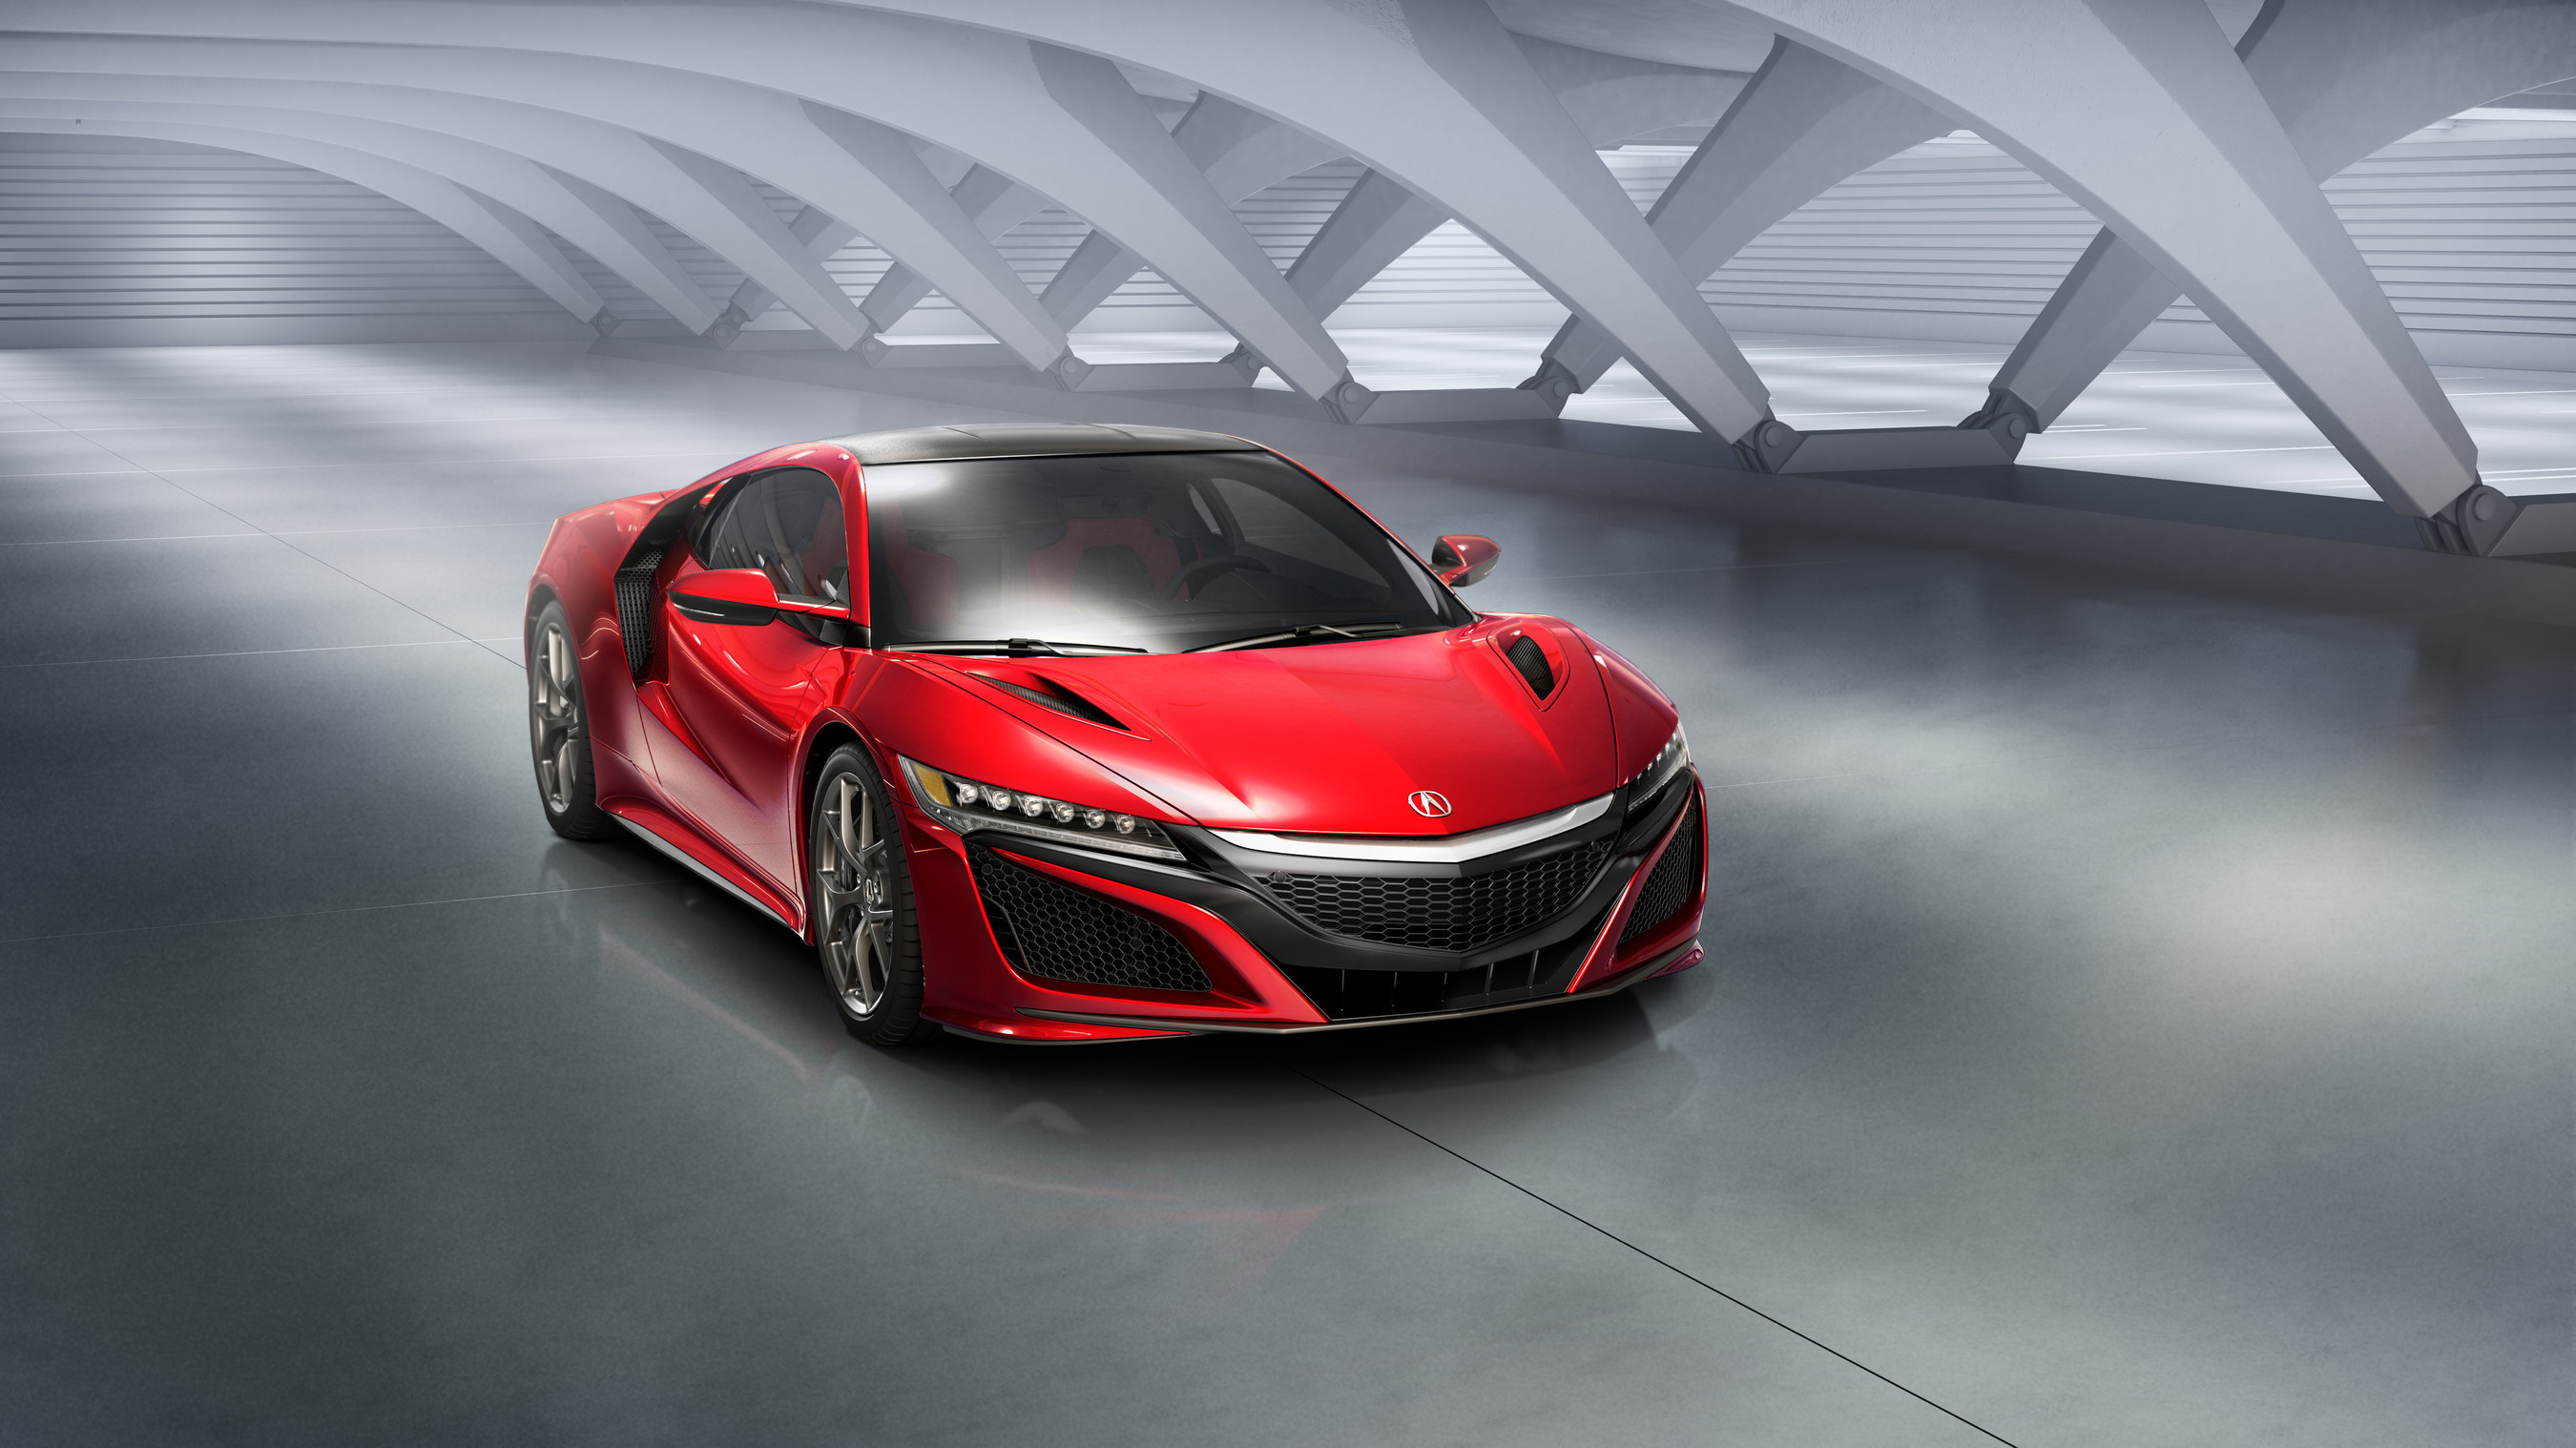 Acura unveiled the next-generation NSX at the North American International Auto Show on Monday, January 12, 2015.